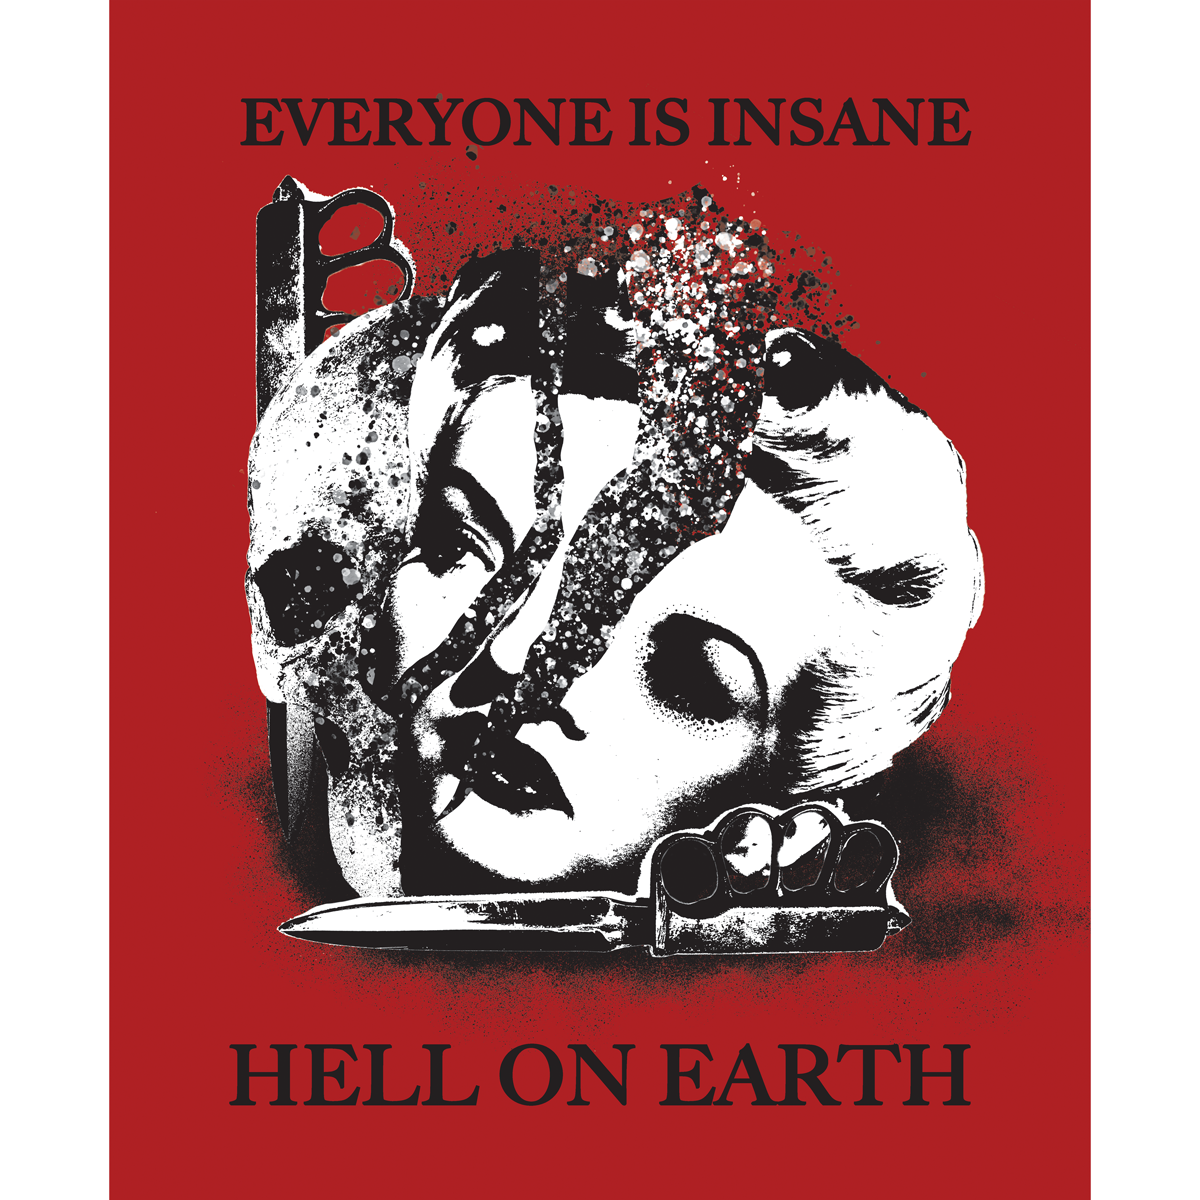 Hell Simulation "Hell On Earth" Giclee Print